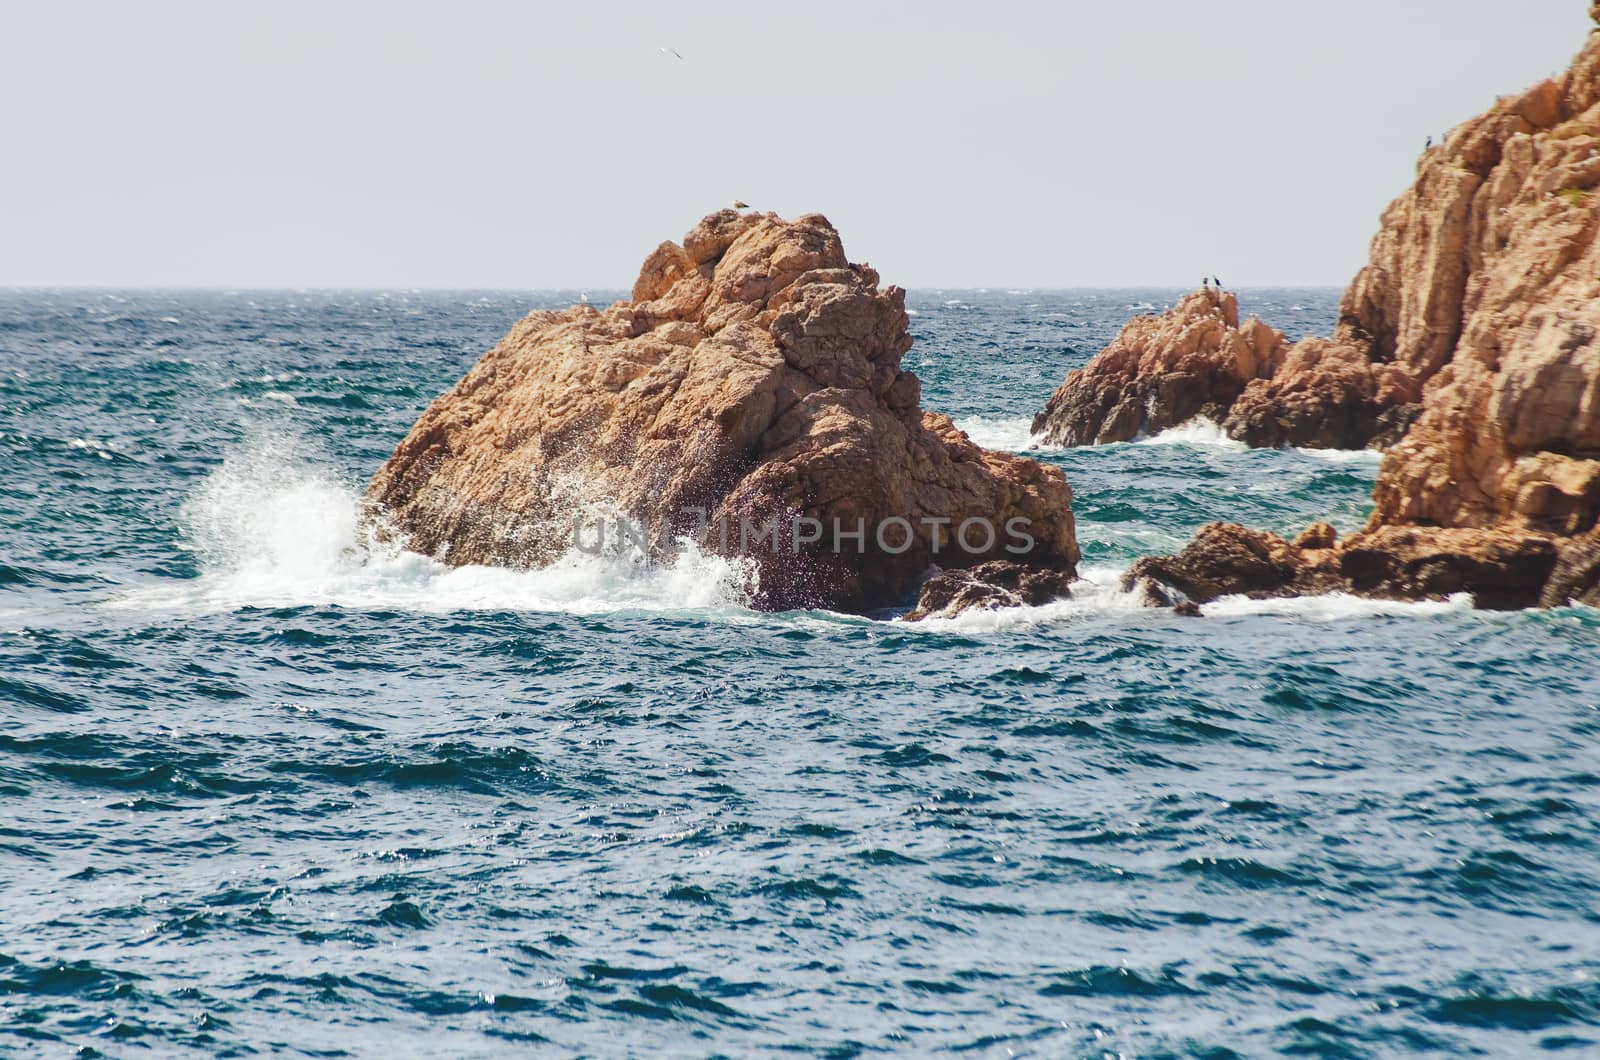 Sea waves lapping on the rocks